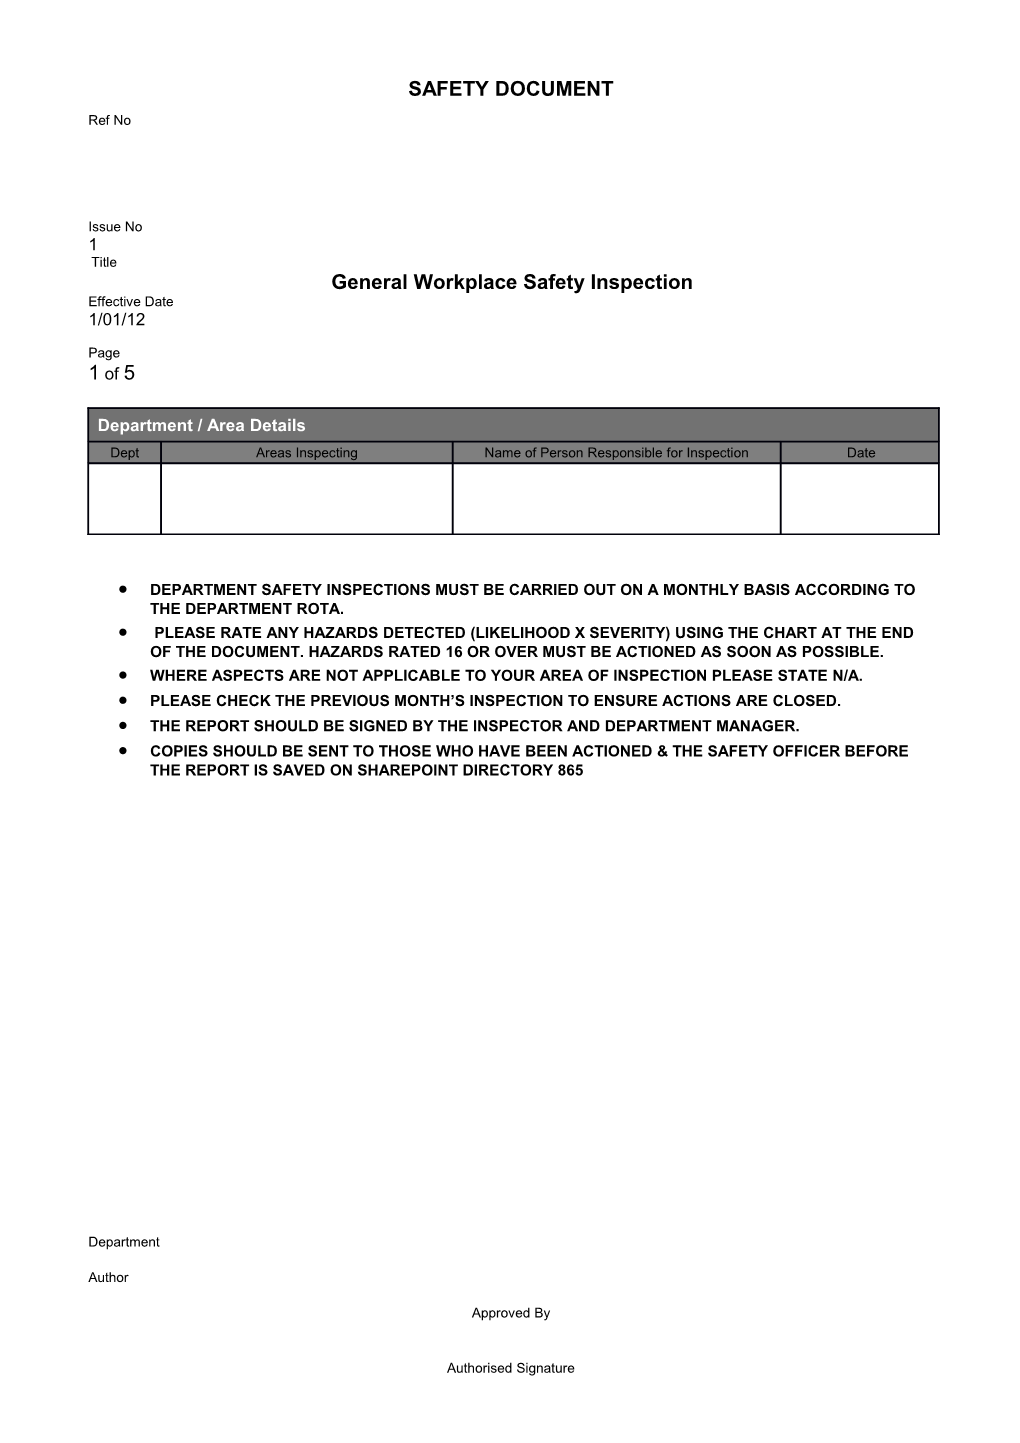 General Workplace Safety Inspection Form (New Form)